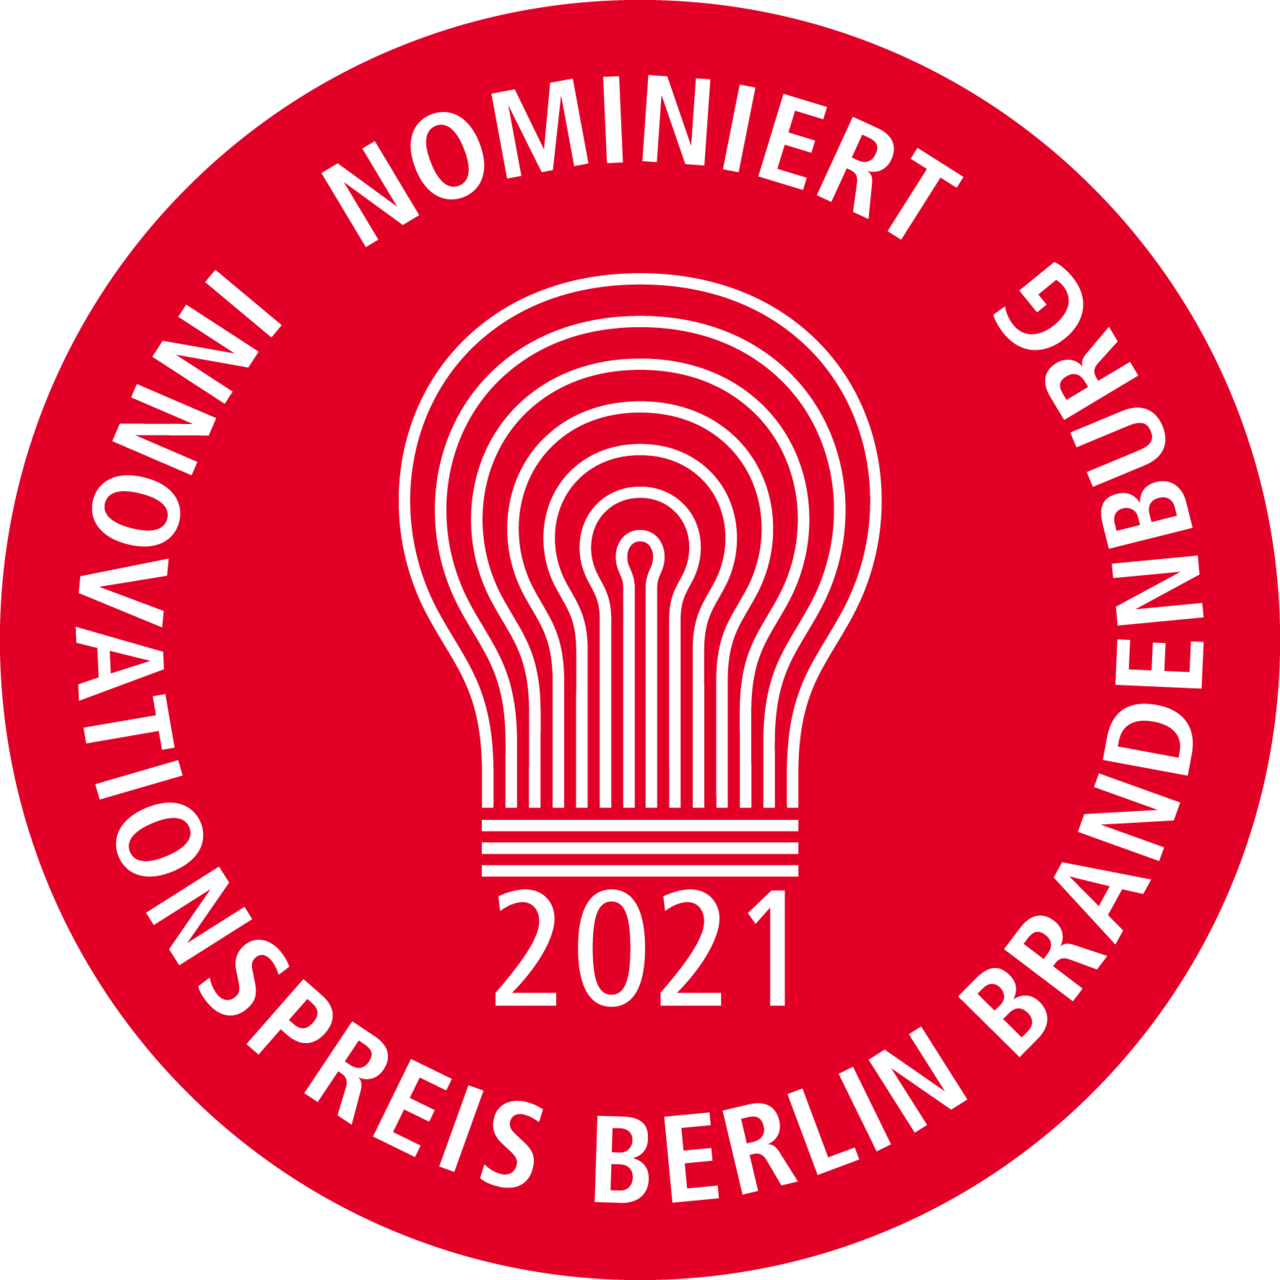 KNAUER has been nominated for the Berlin-Brandenburg Innovation Prize 